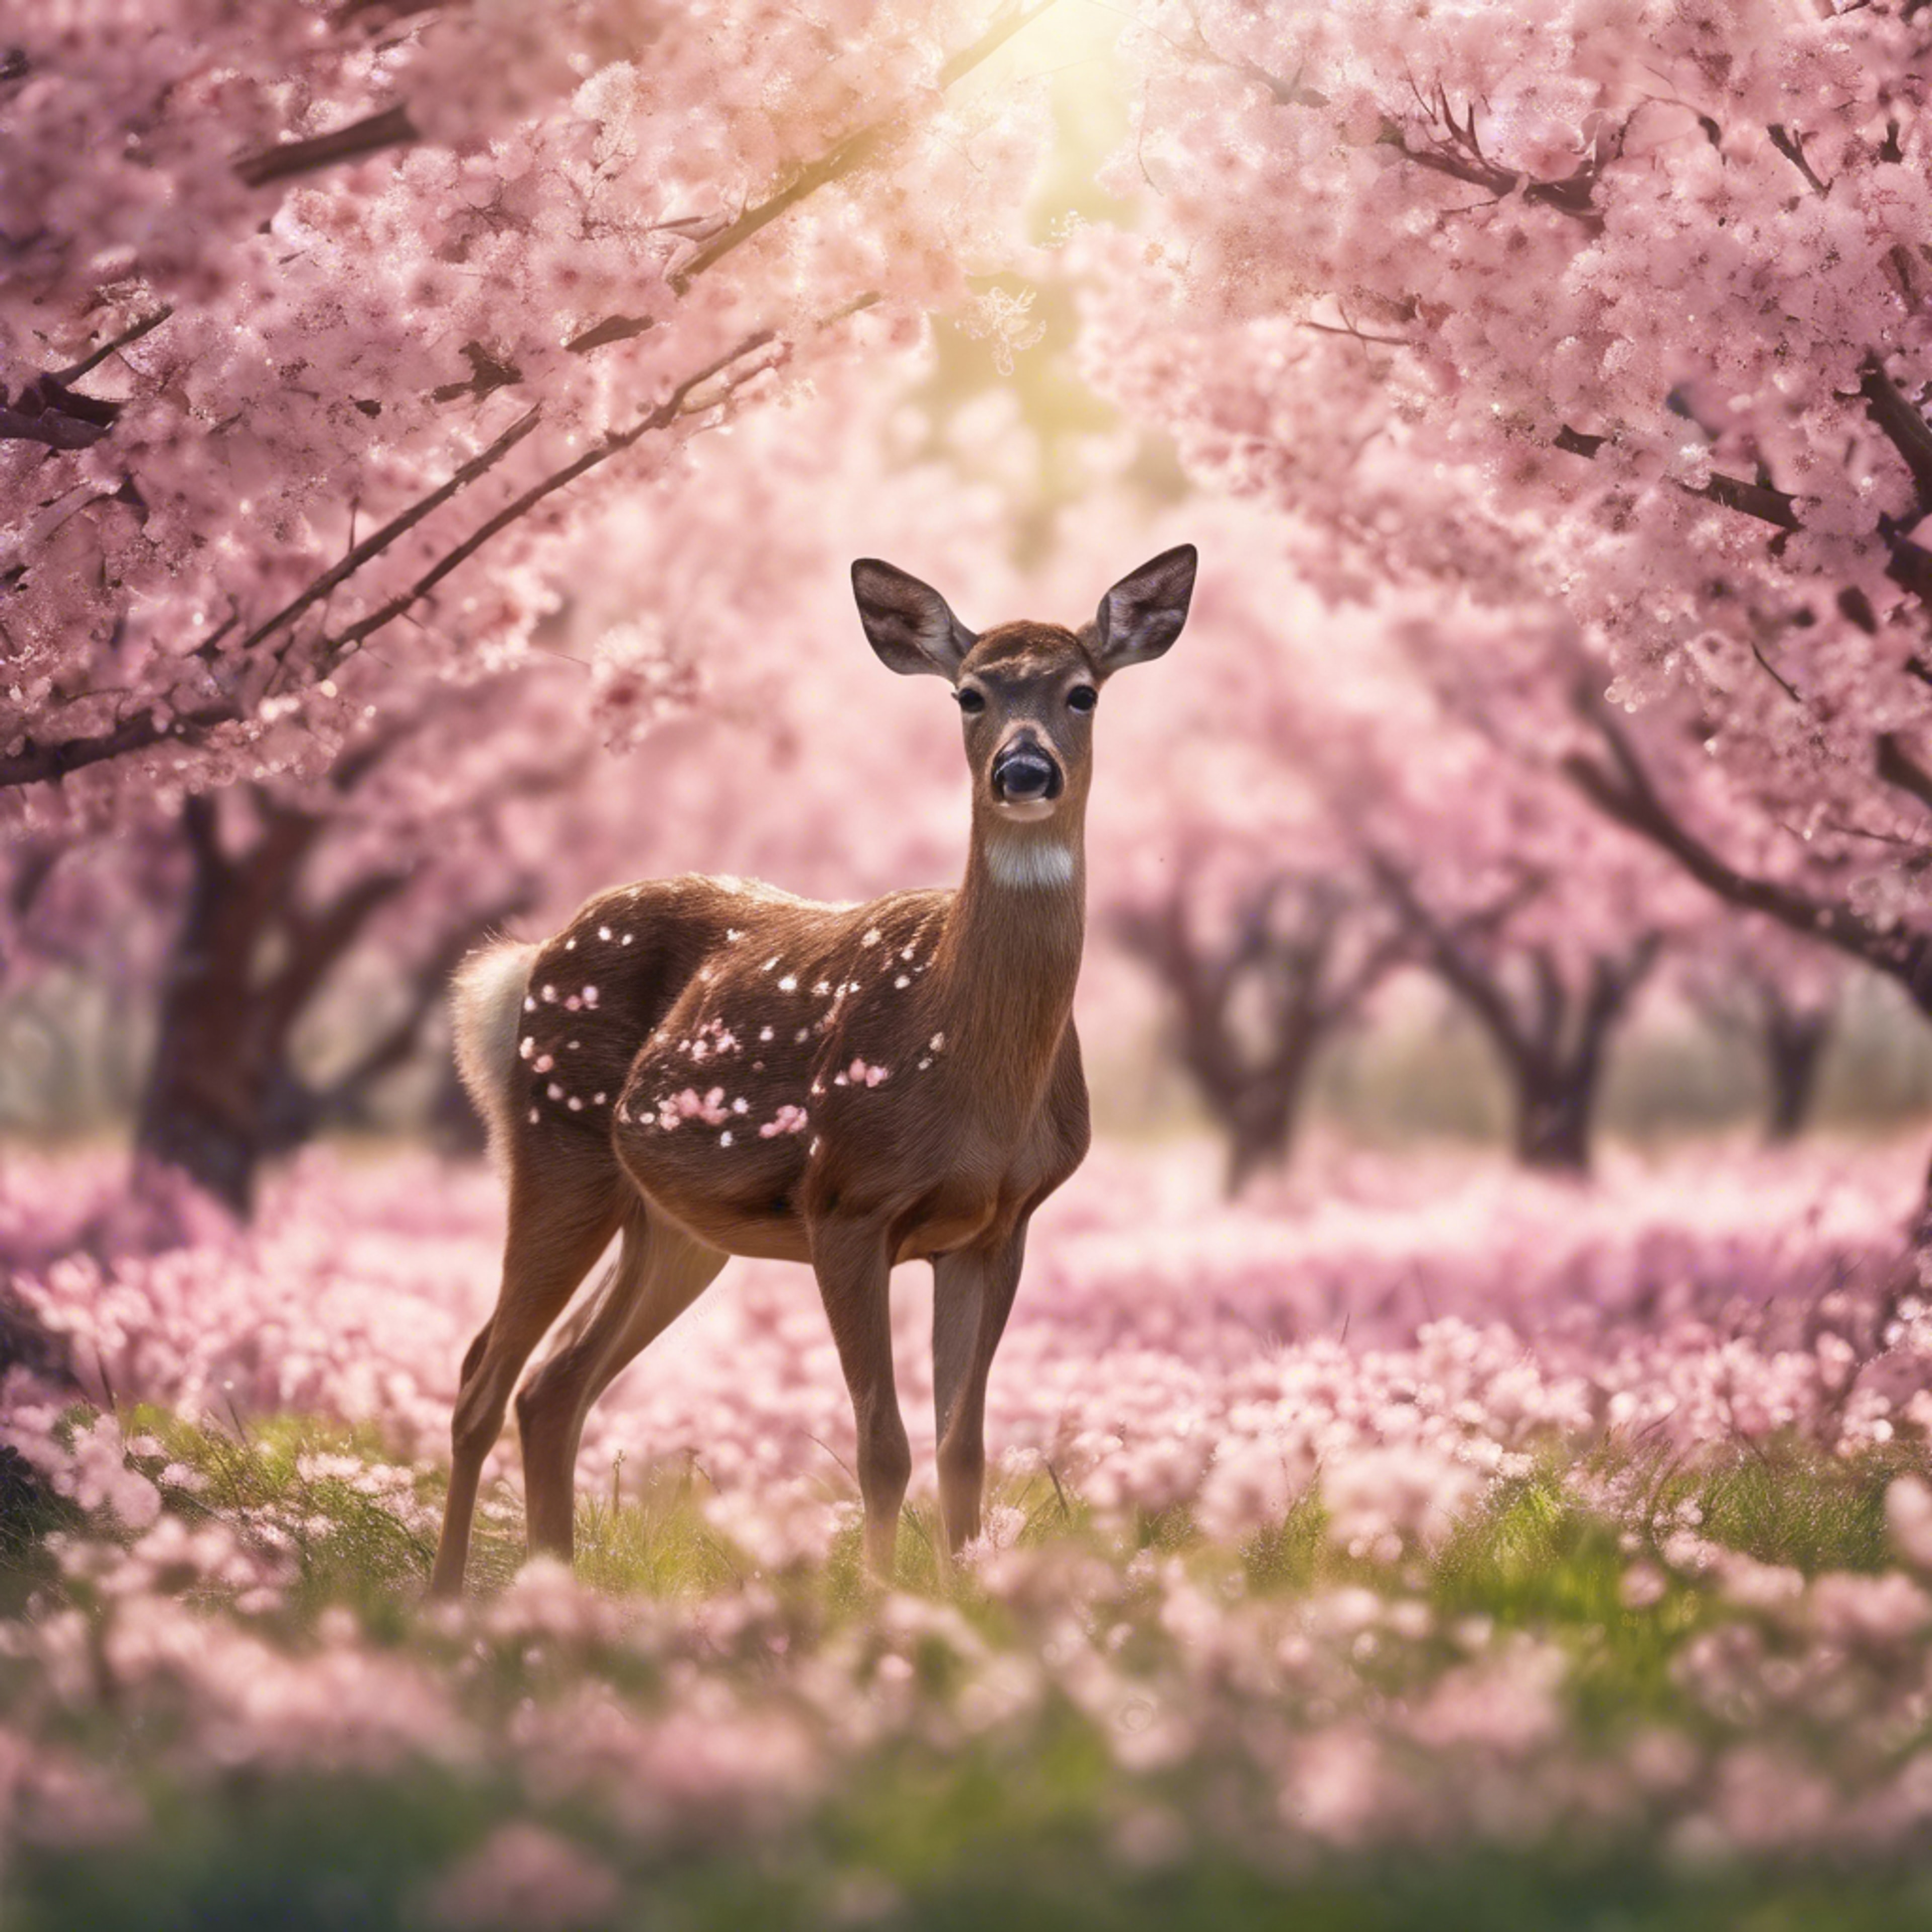 An illustration of a young deer grazing in a field of blooming cherry trees.壁紙[a2b025554c3c4b6aabc3]